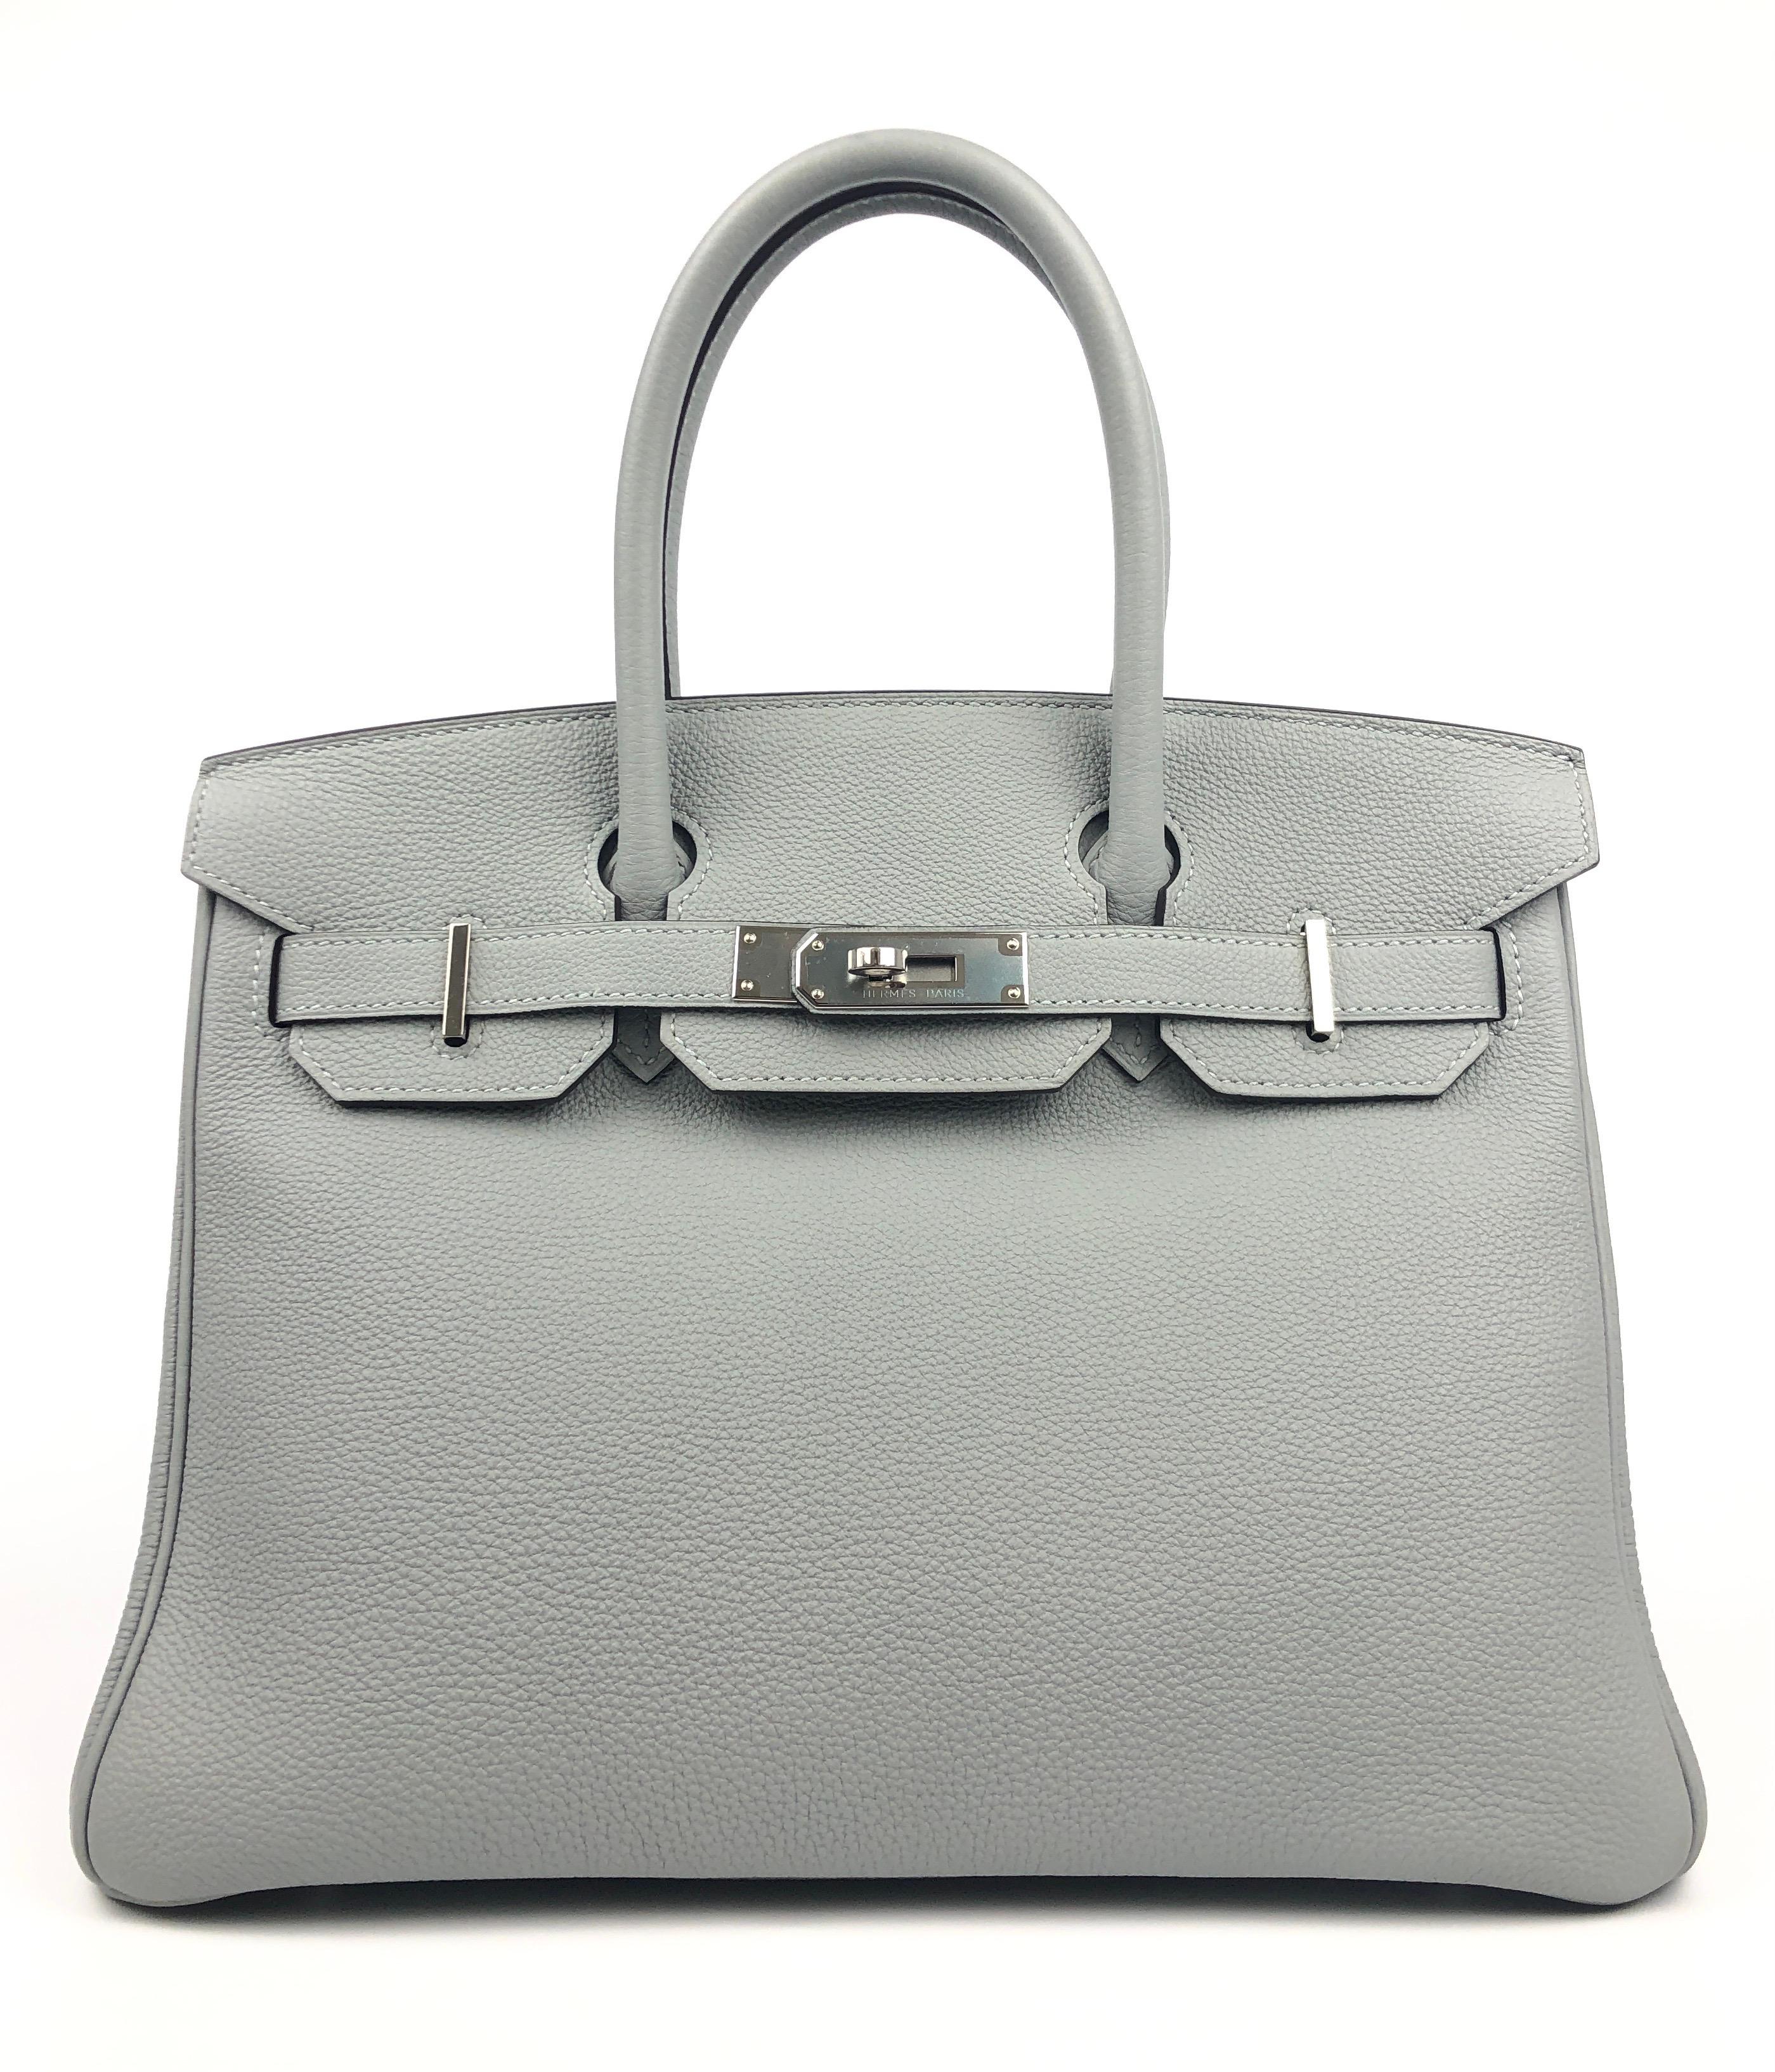 RARE Stunning Hermes Birkin 30 Bleu Glacier Blue Gray Togo Palladium Hardware. Pristine Condition with Plastic on Hardware.

Shop with Confidence from Lux Addicts. Authenticity Guaranteed! 